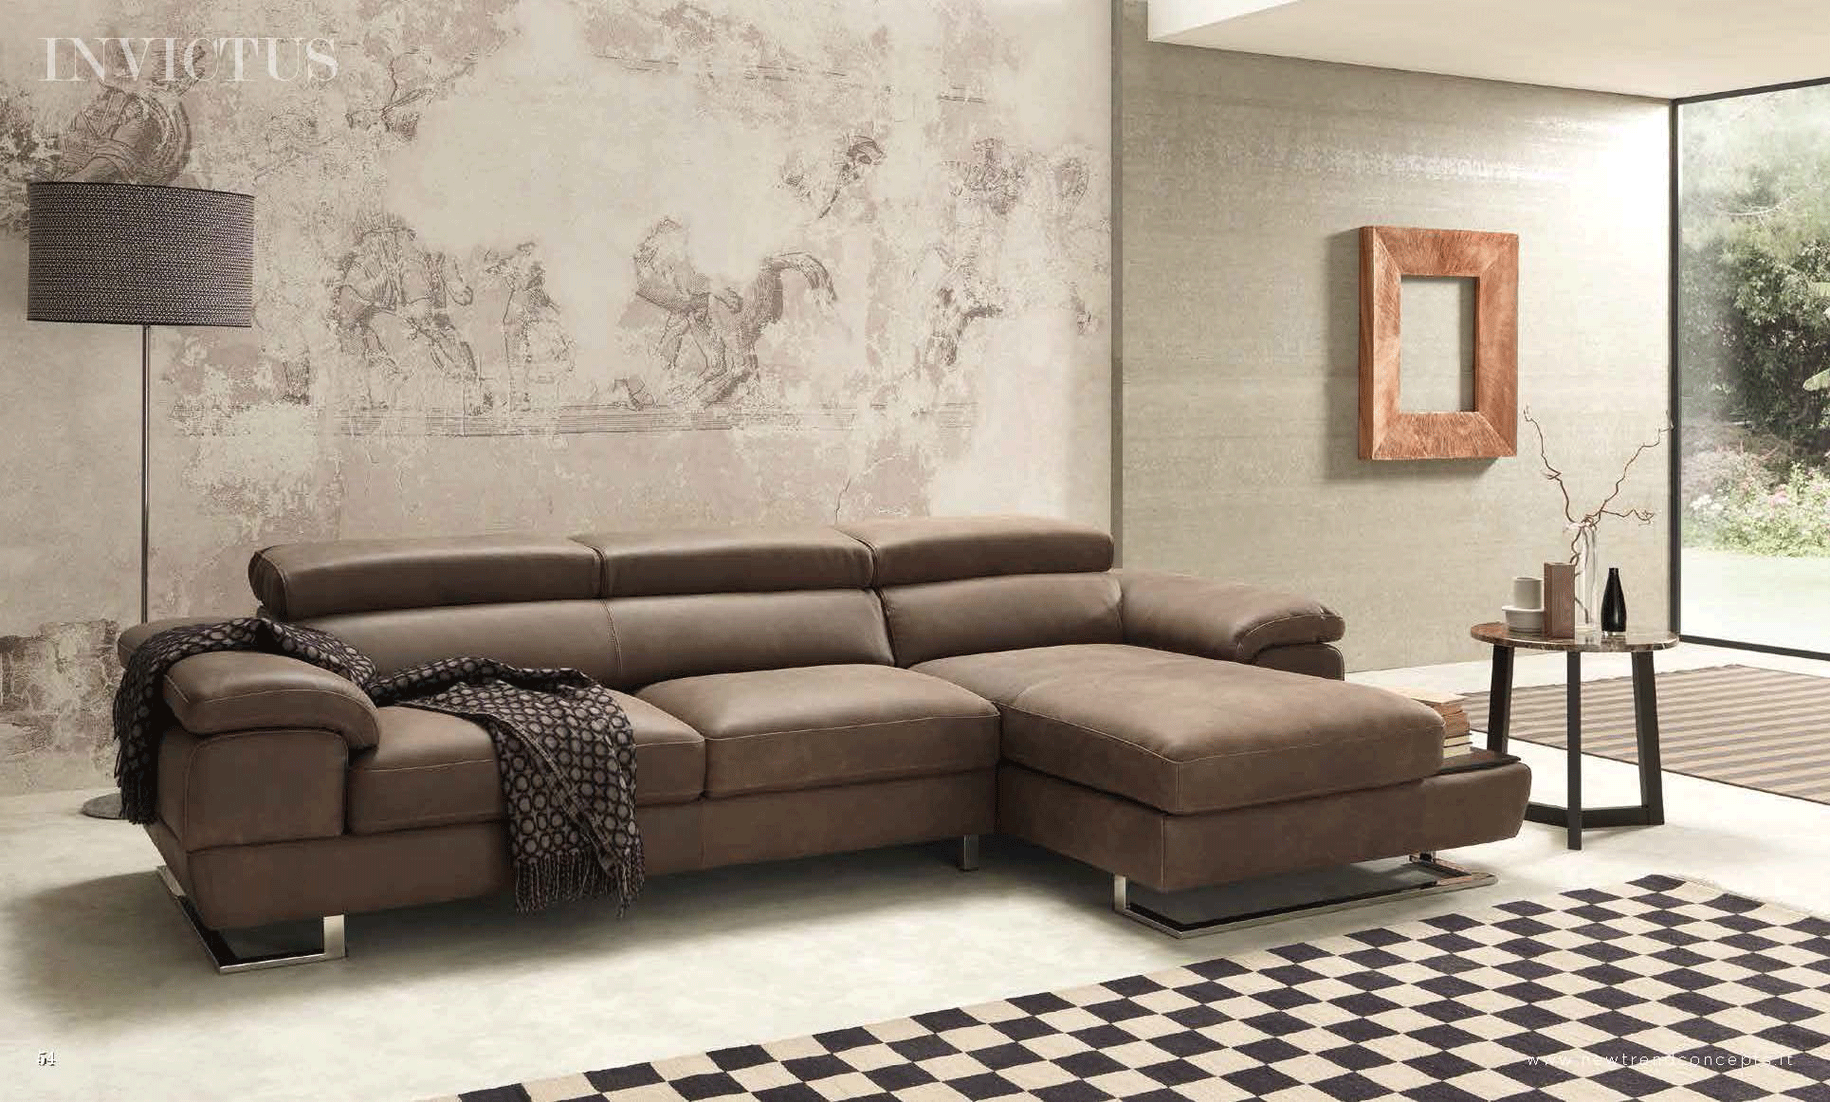 Living Room Furniture New Trend Concepts Urban Living Room Collection Invictus